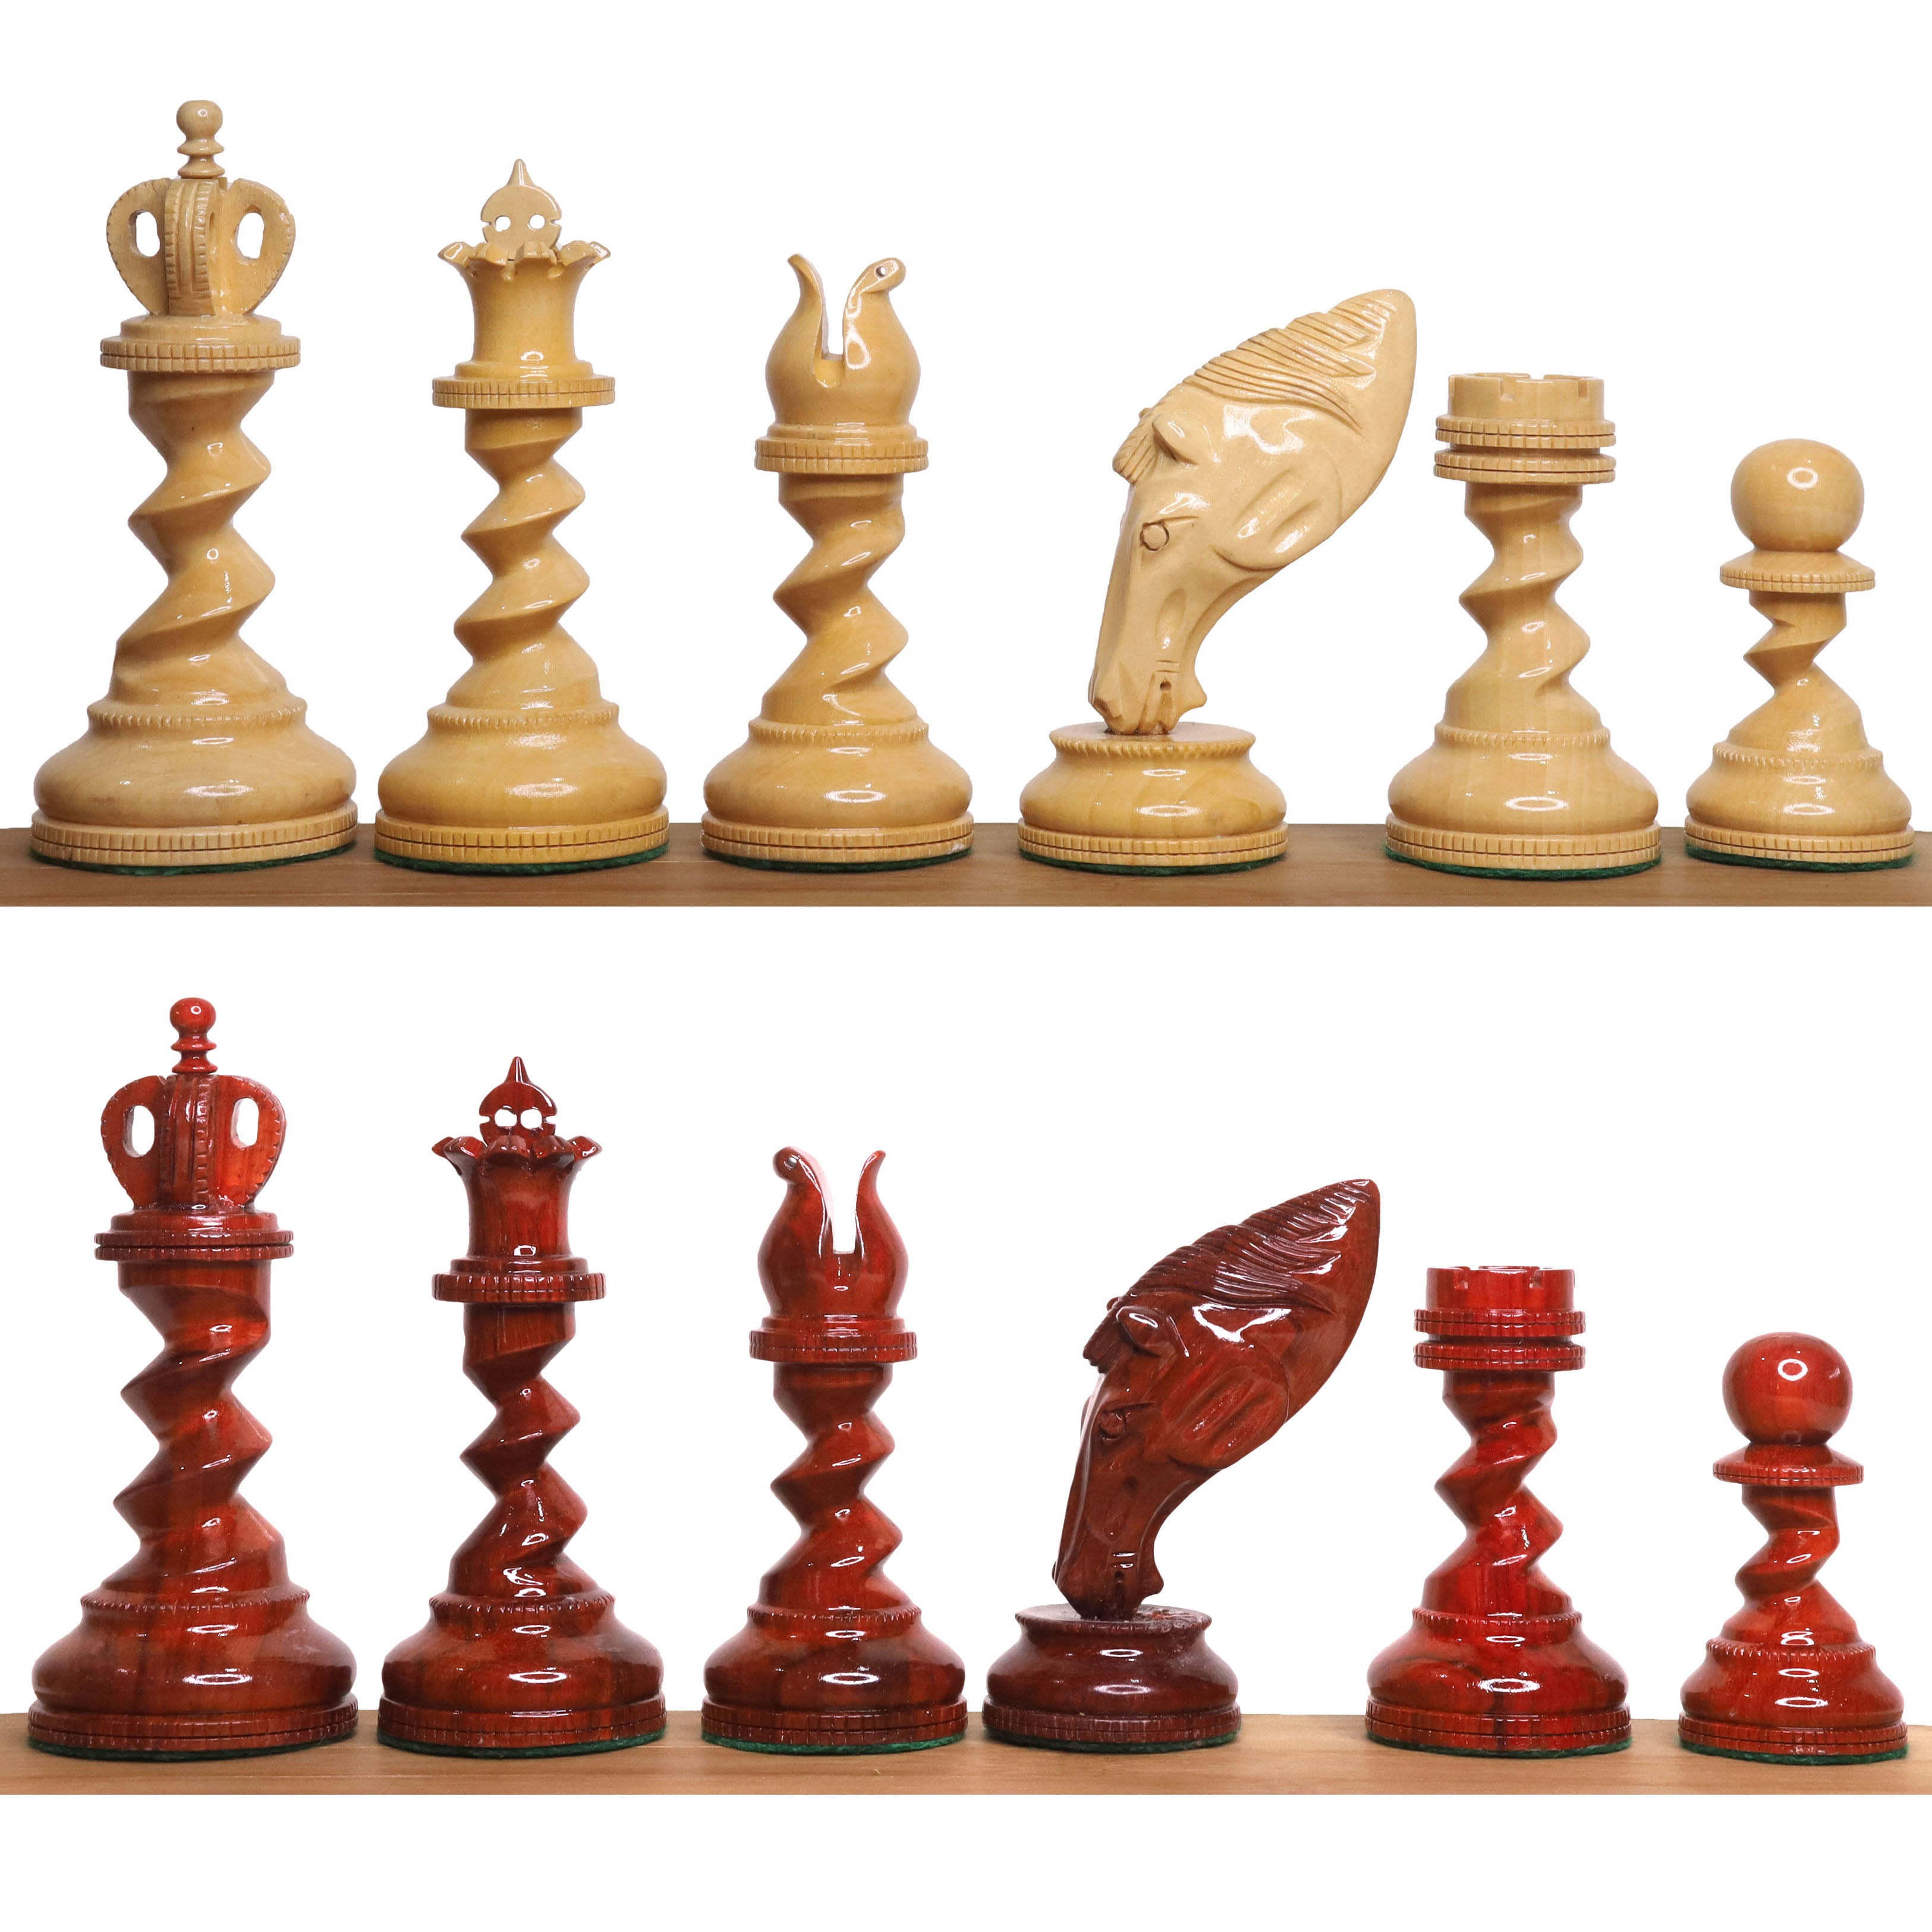 4.3" Grazing Knight Luxury Staunton Chess Pieces Only Set-Lacquered Bud Rosewood